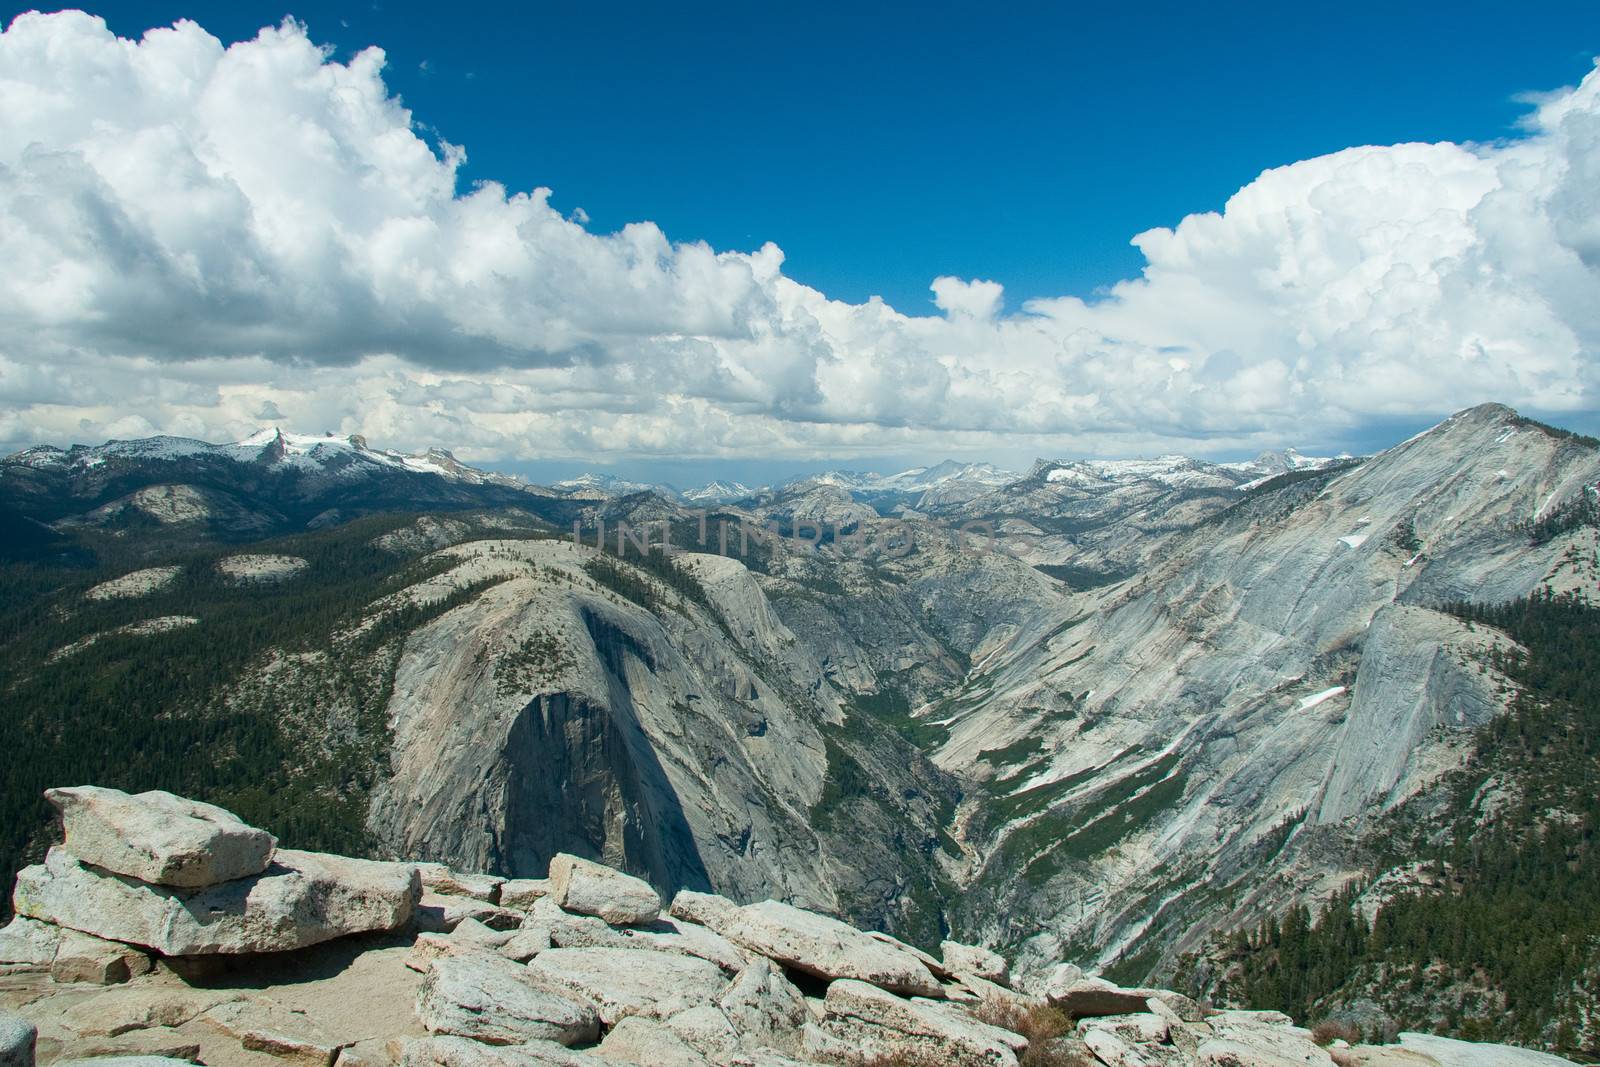 Mountainous landscape of Yosemite National Park viewed from Half Dome, California, U.S.A.